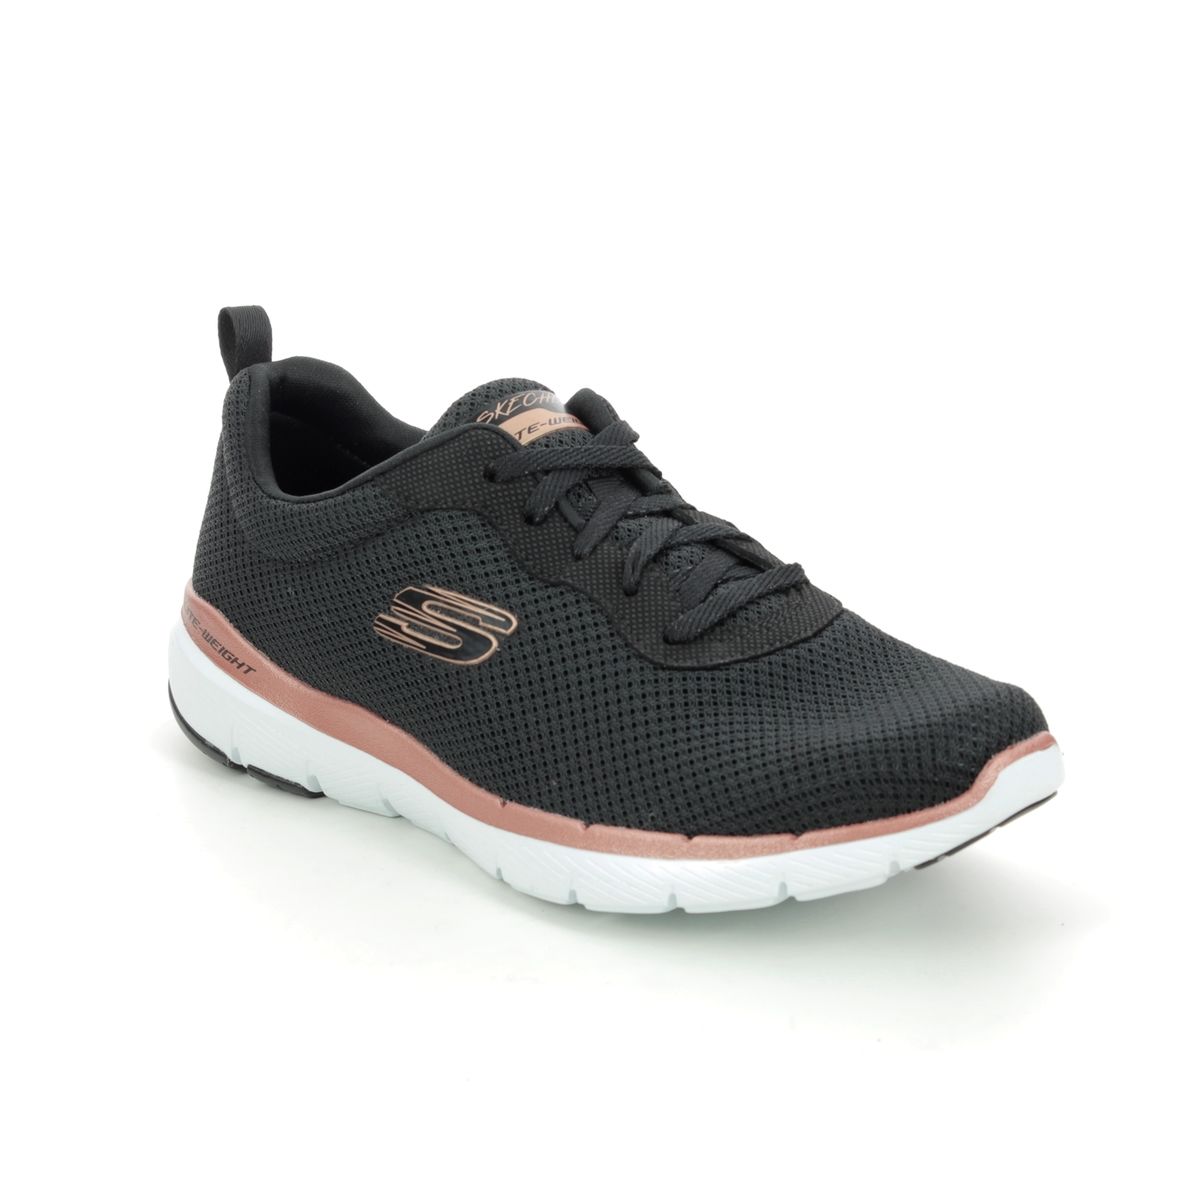 Insight 13070 Black Rose Gold trainers